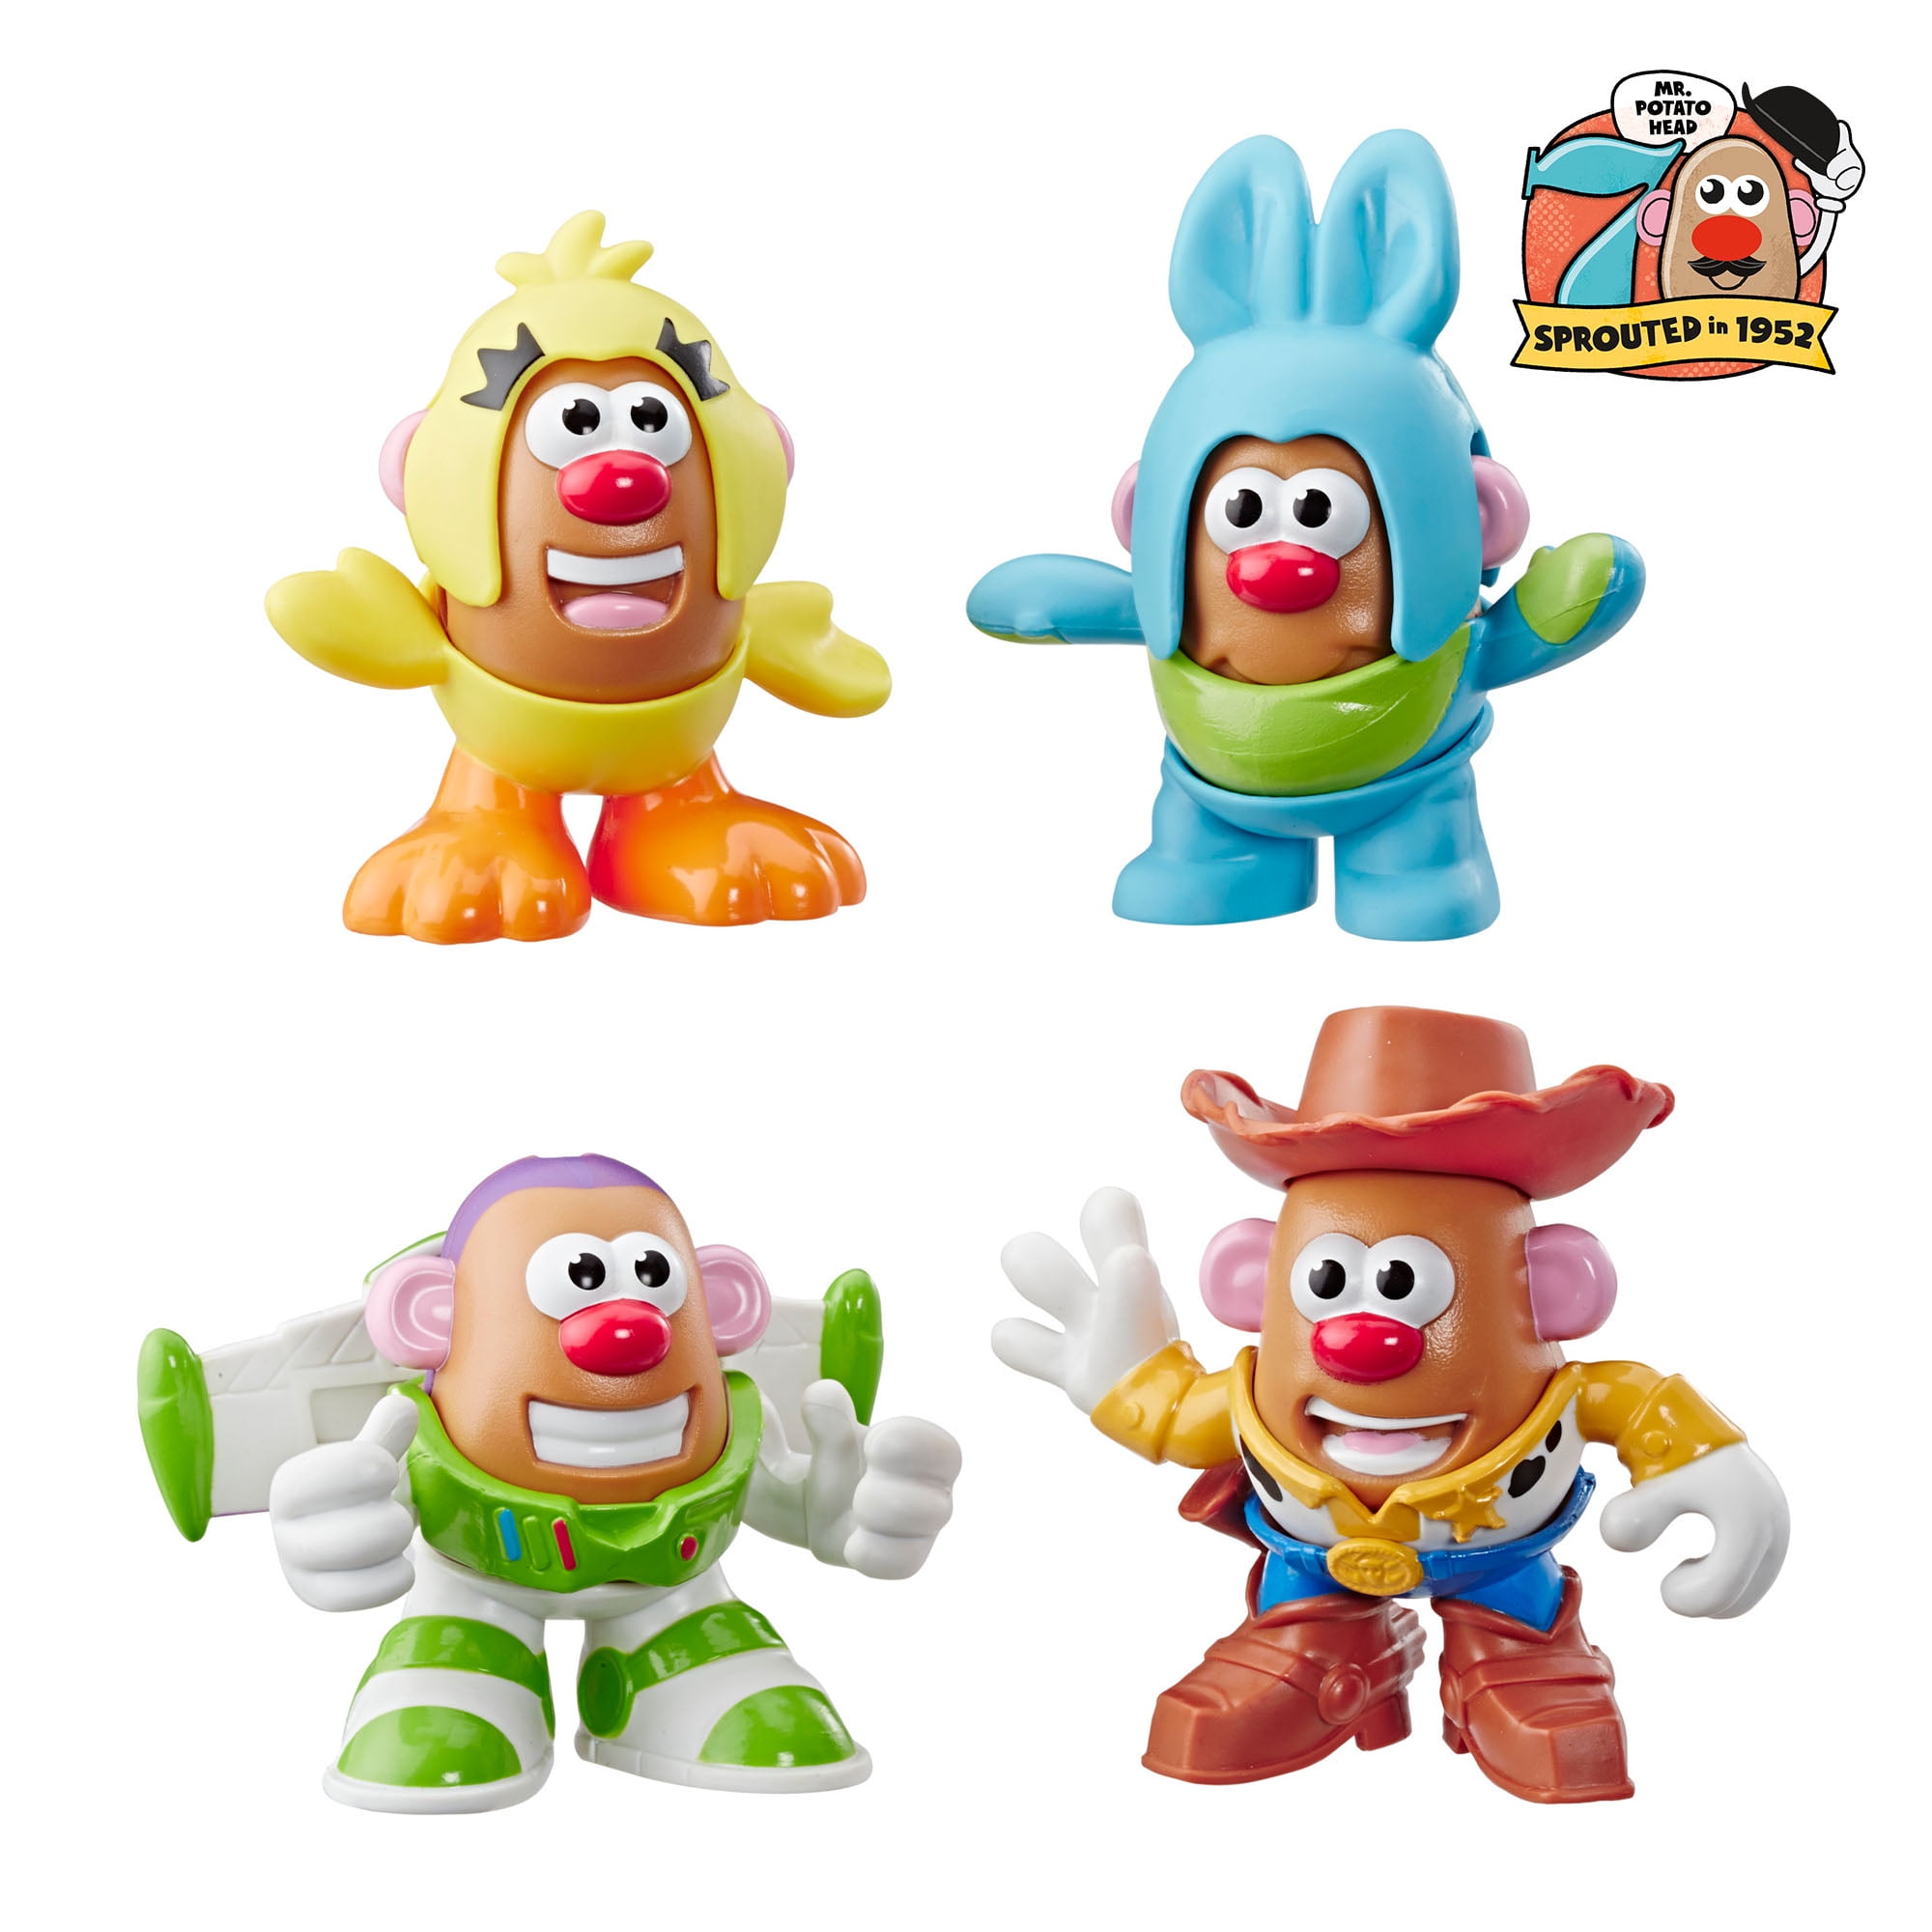 You Pick from 5 Character Options Toy Story 4 Mini Figurine Toy or Cake Topper 